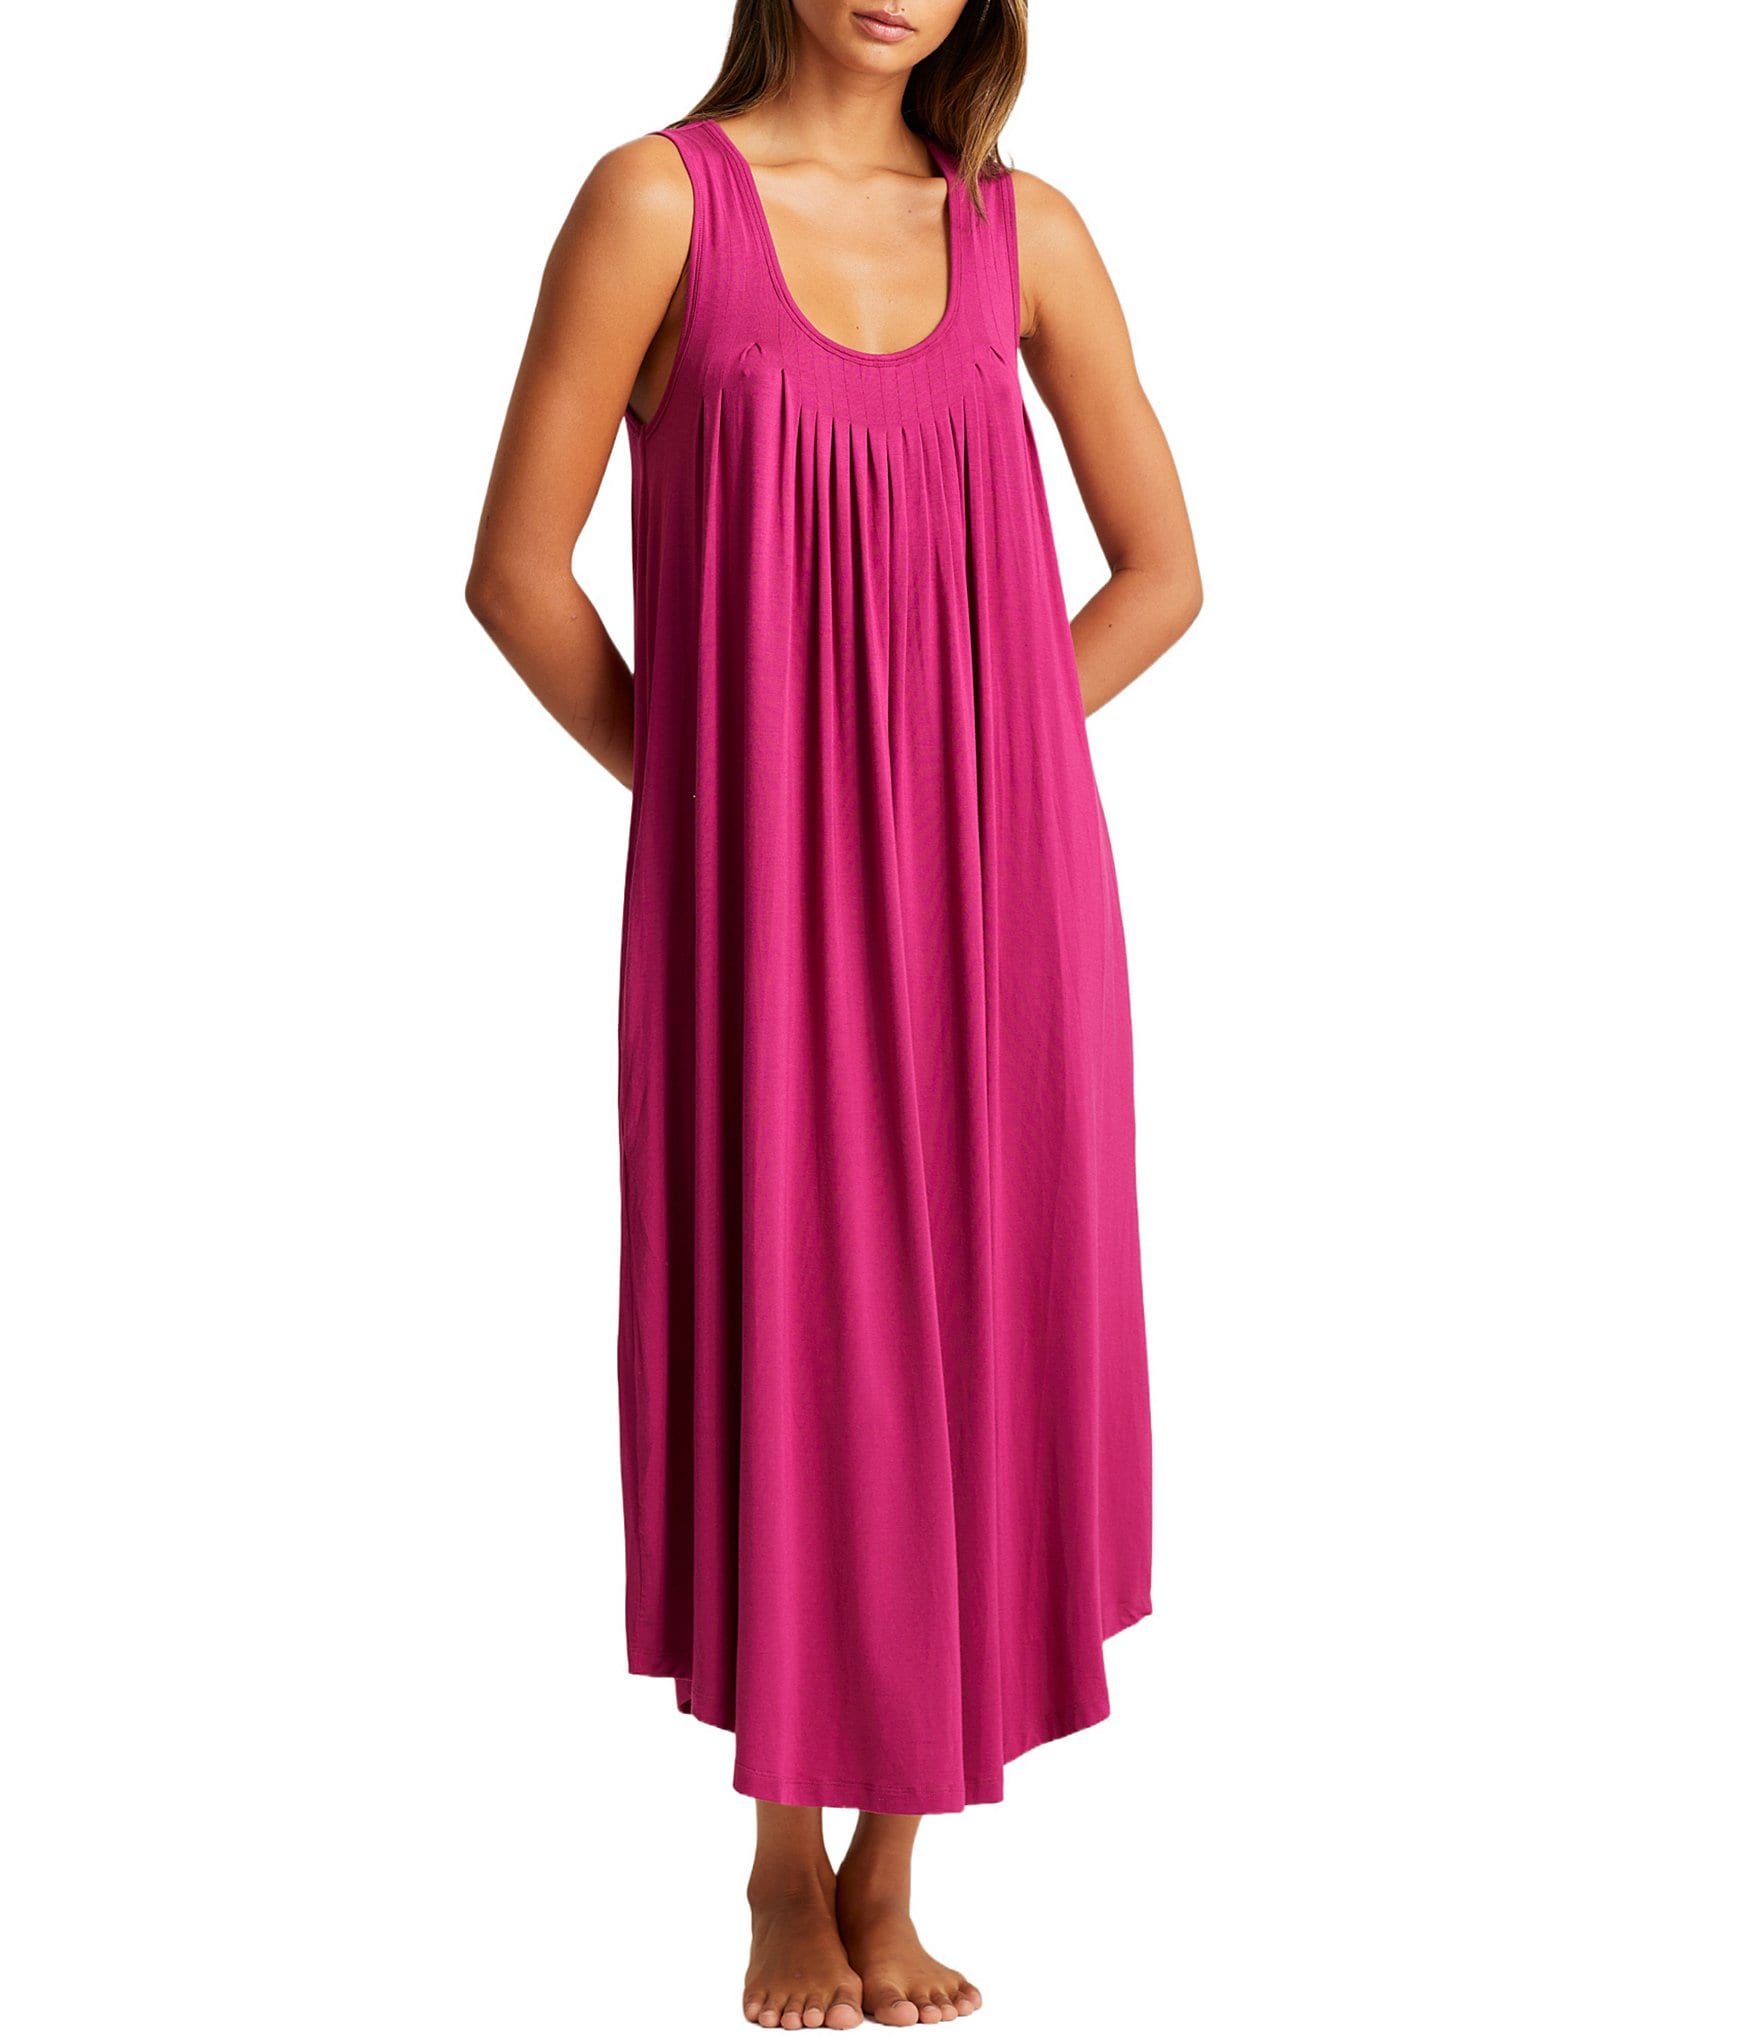 Papinelle Sleeveless Scoop Neck Soft Modal Pleated Nightgown